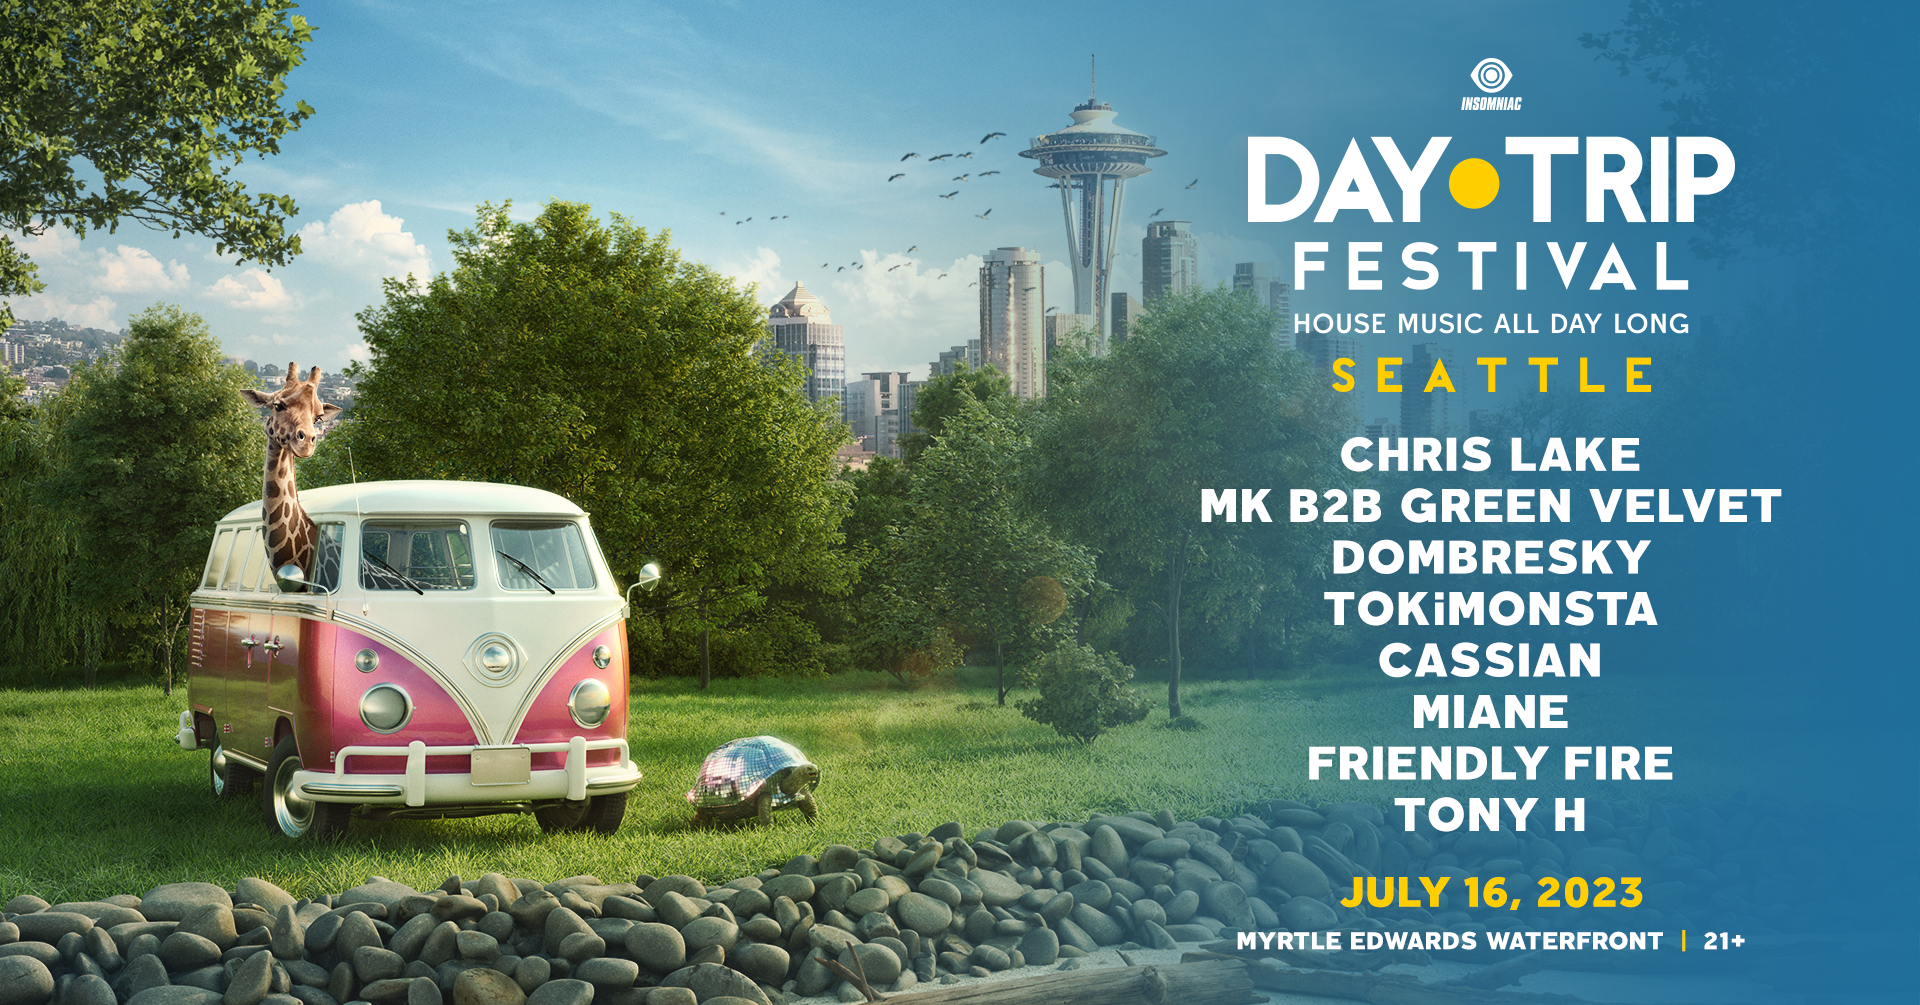 Day Trip Festival Seattle - フライヤー表